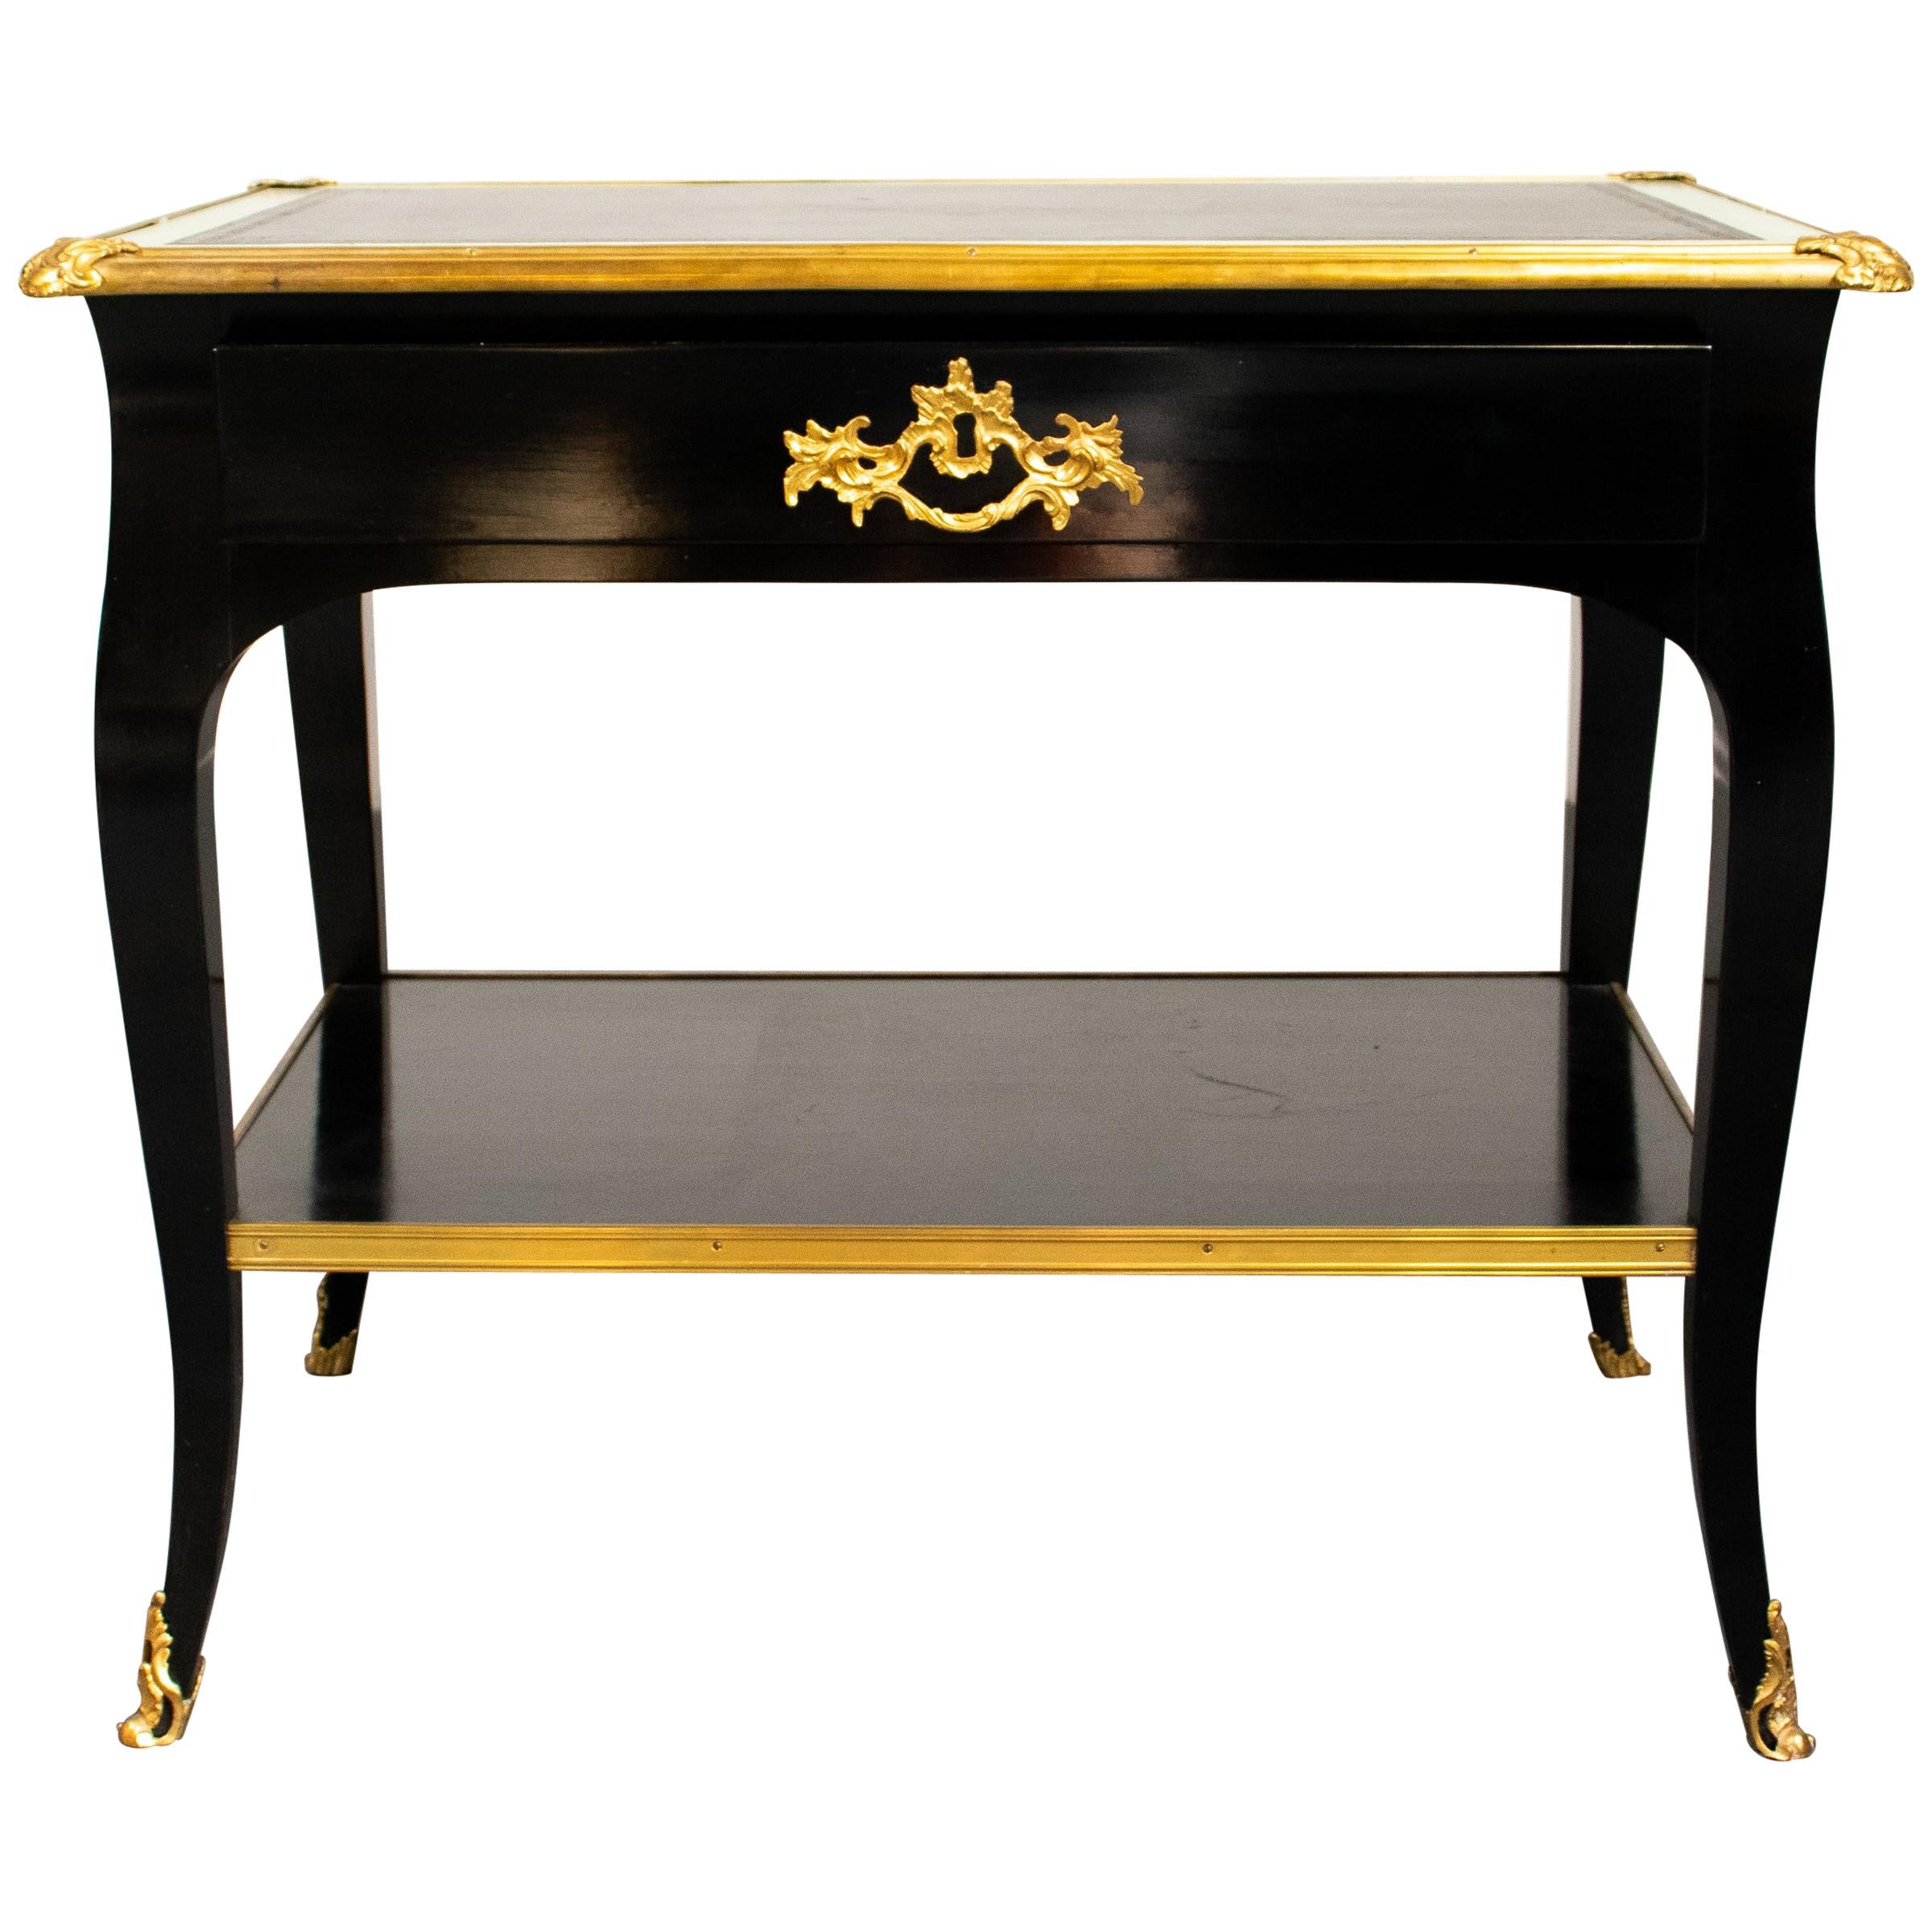 French Louis XV Style Gilt Mounted Ebonized Tea Table with Cabriole Legs